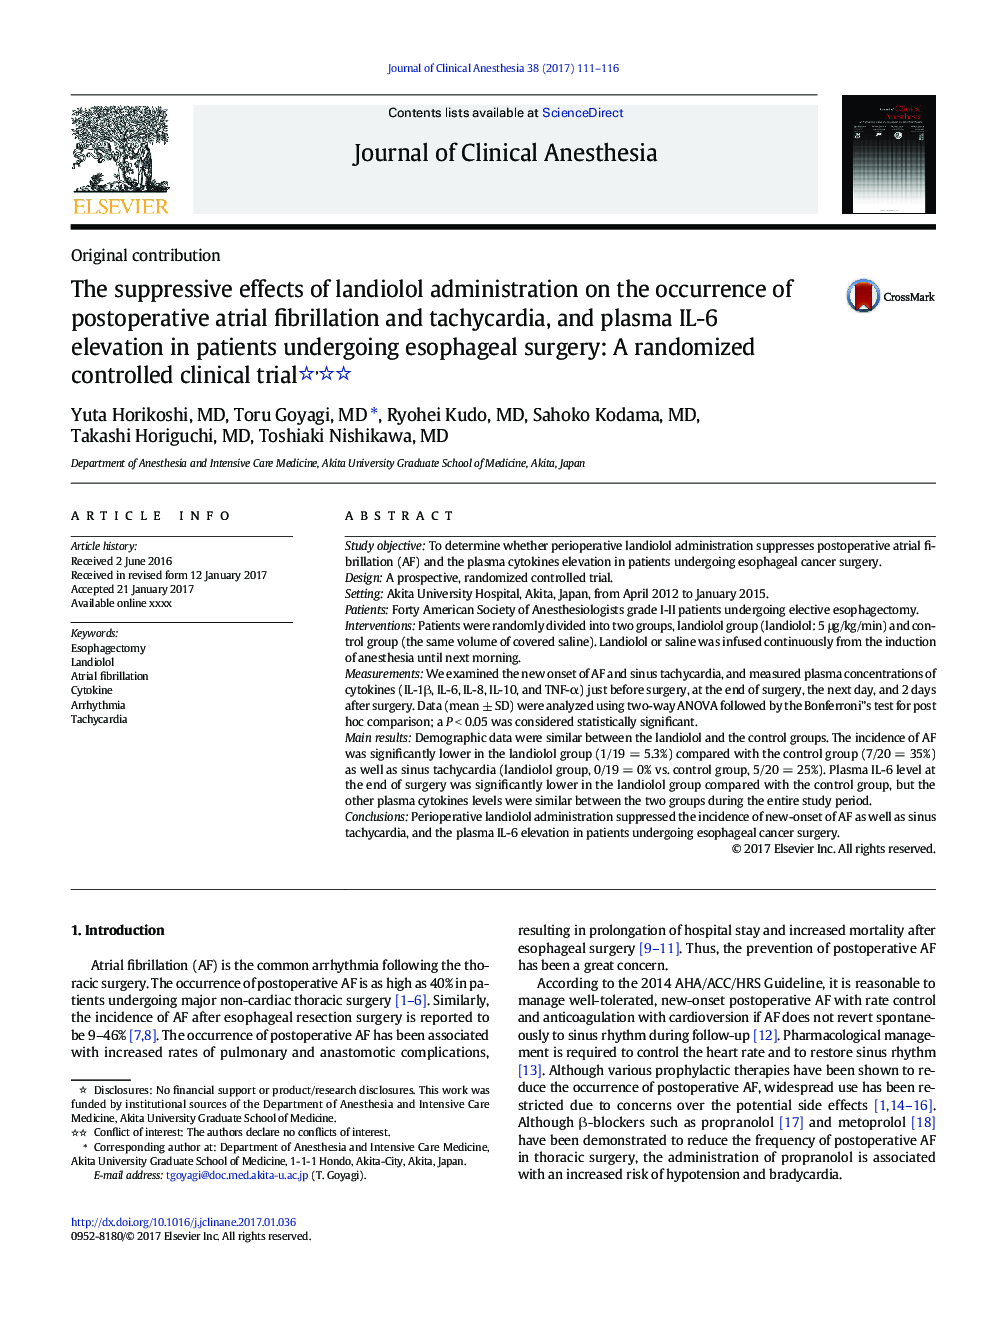 The suppressive effects of landiolol administration on the occurrence of postoperative atrial fibrillation and tachycardia, and plasma IL-6 elevation in patients undergoing esophageal surgery: A randomized controlled clinical trial